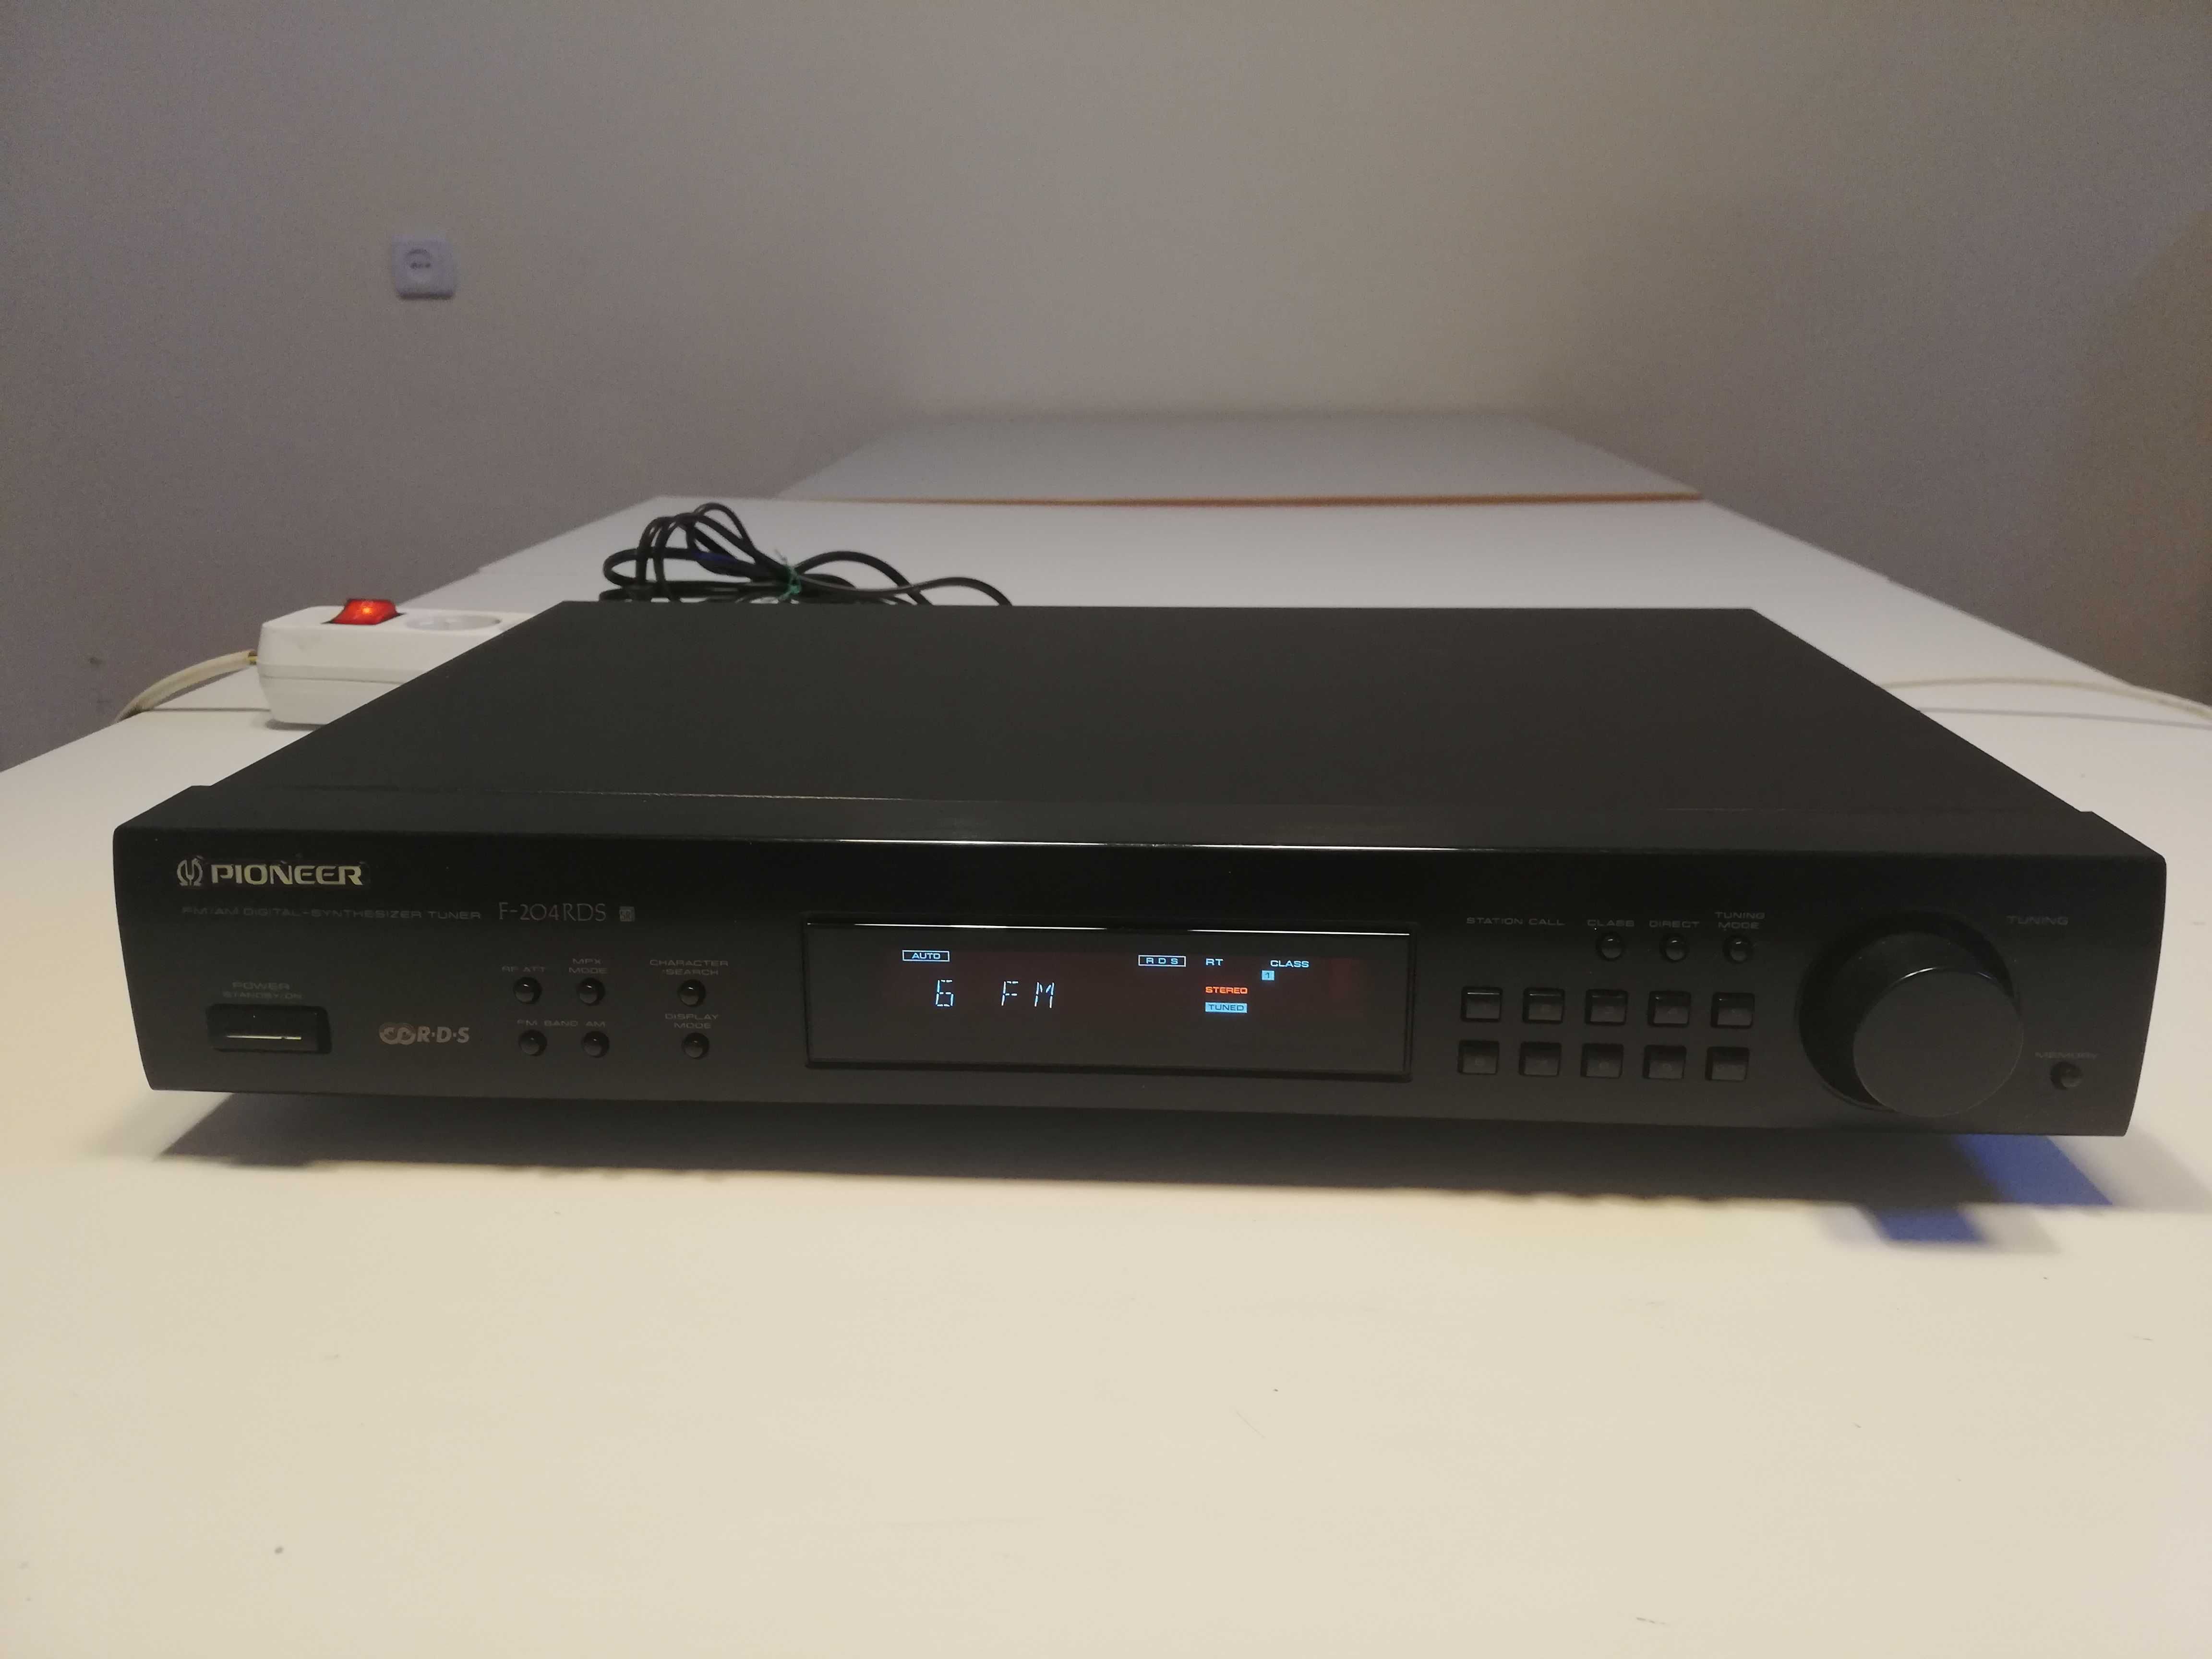 Tuner PIONEER model F204RDS - FM Stereo / AM - Impecabil/England